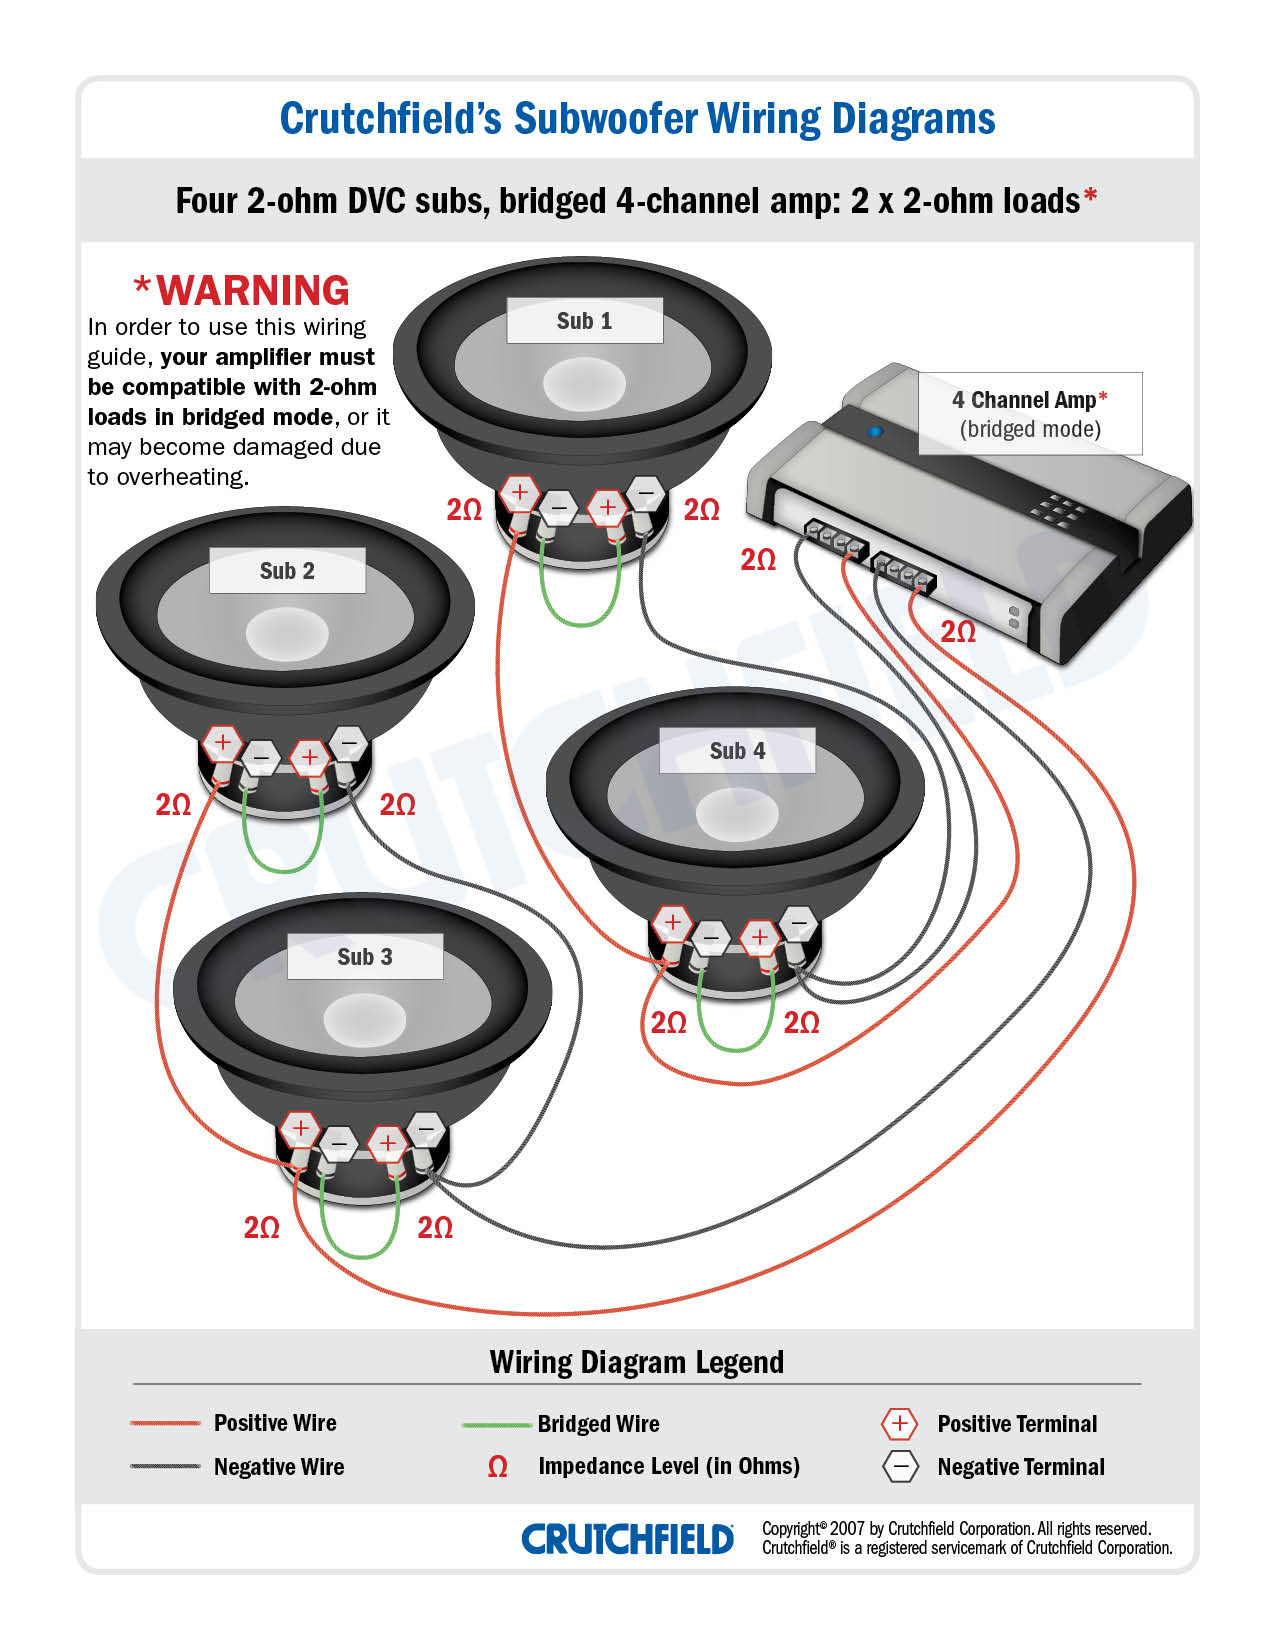 Subwoofer Wiring Diagrams At How To Wire Car Speakers Amp Diagram - Speaker Wiring Diagram